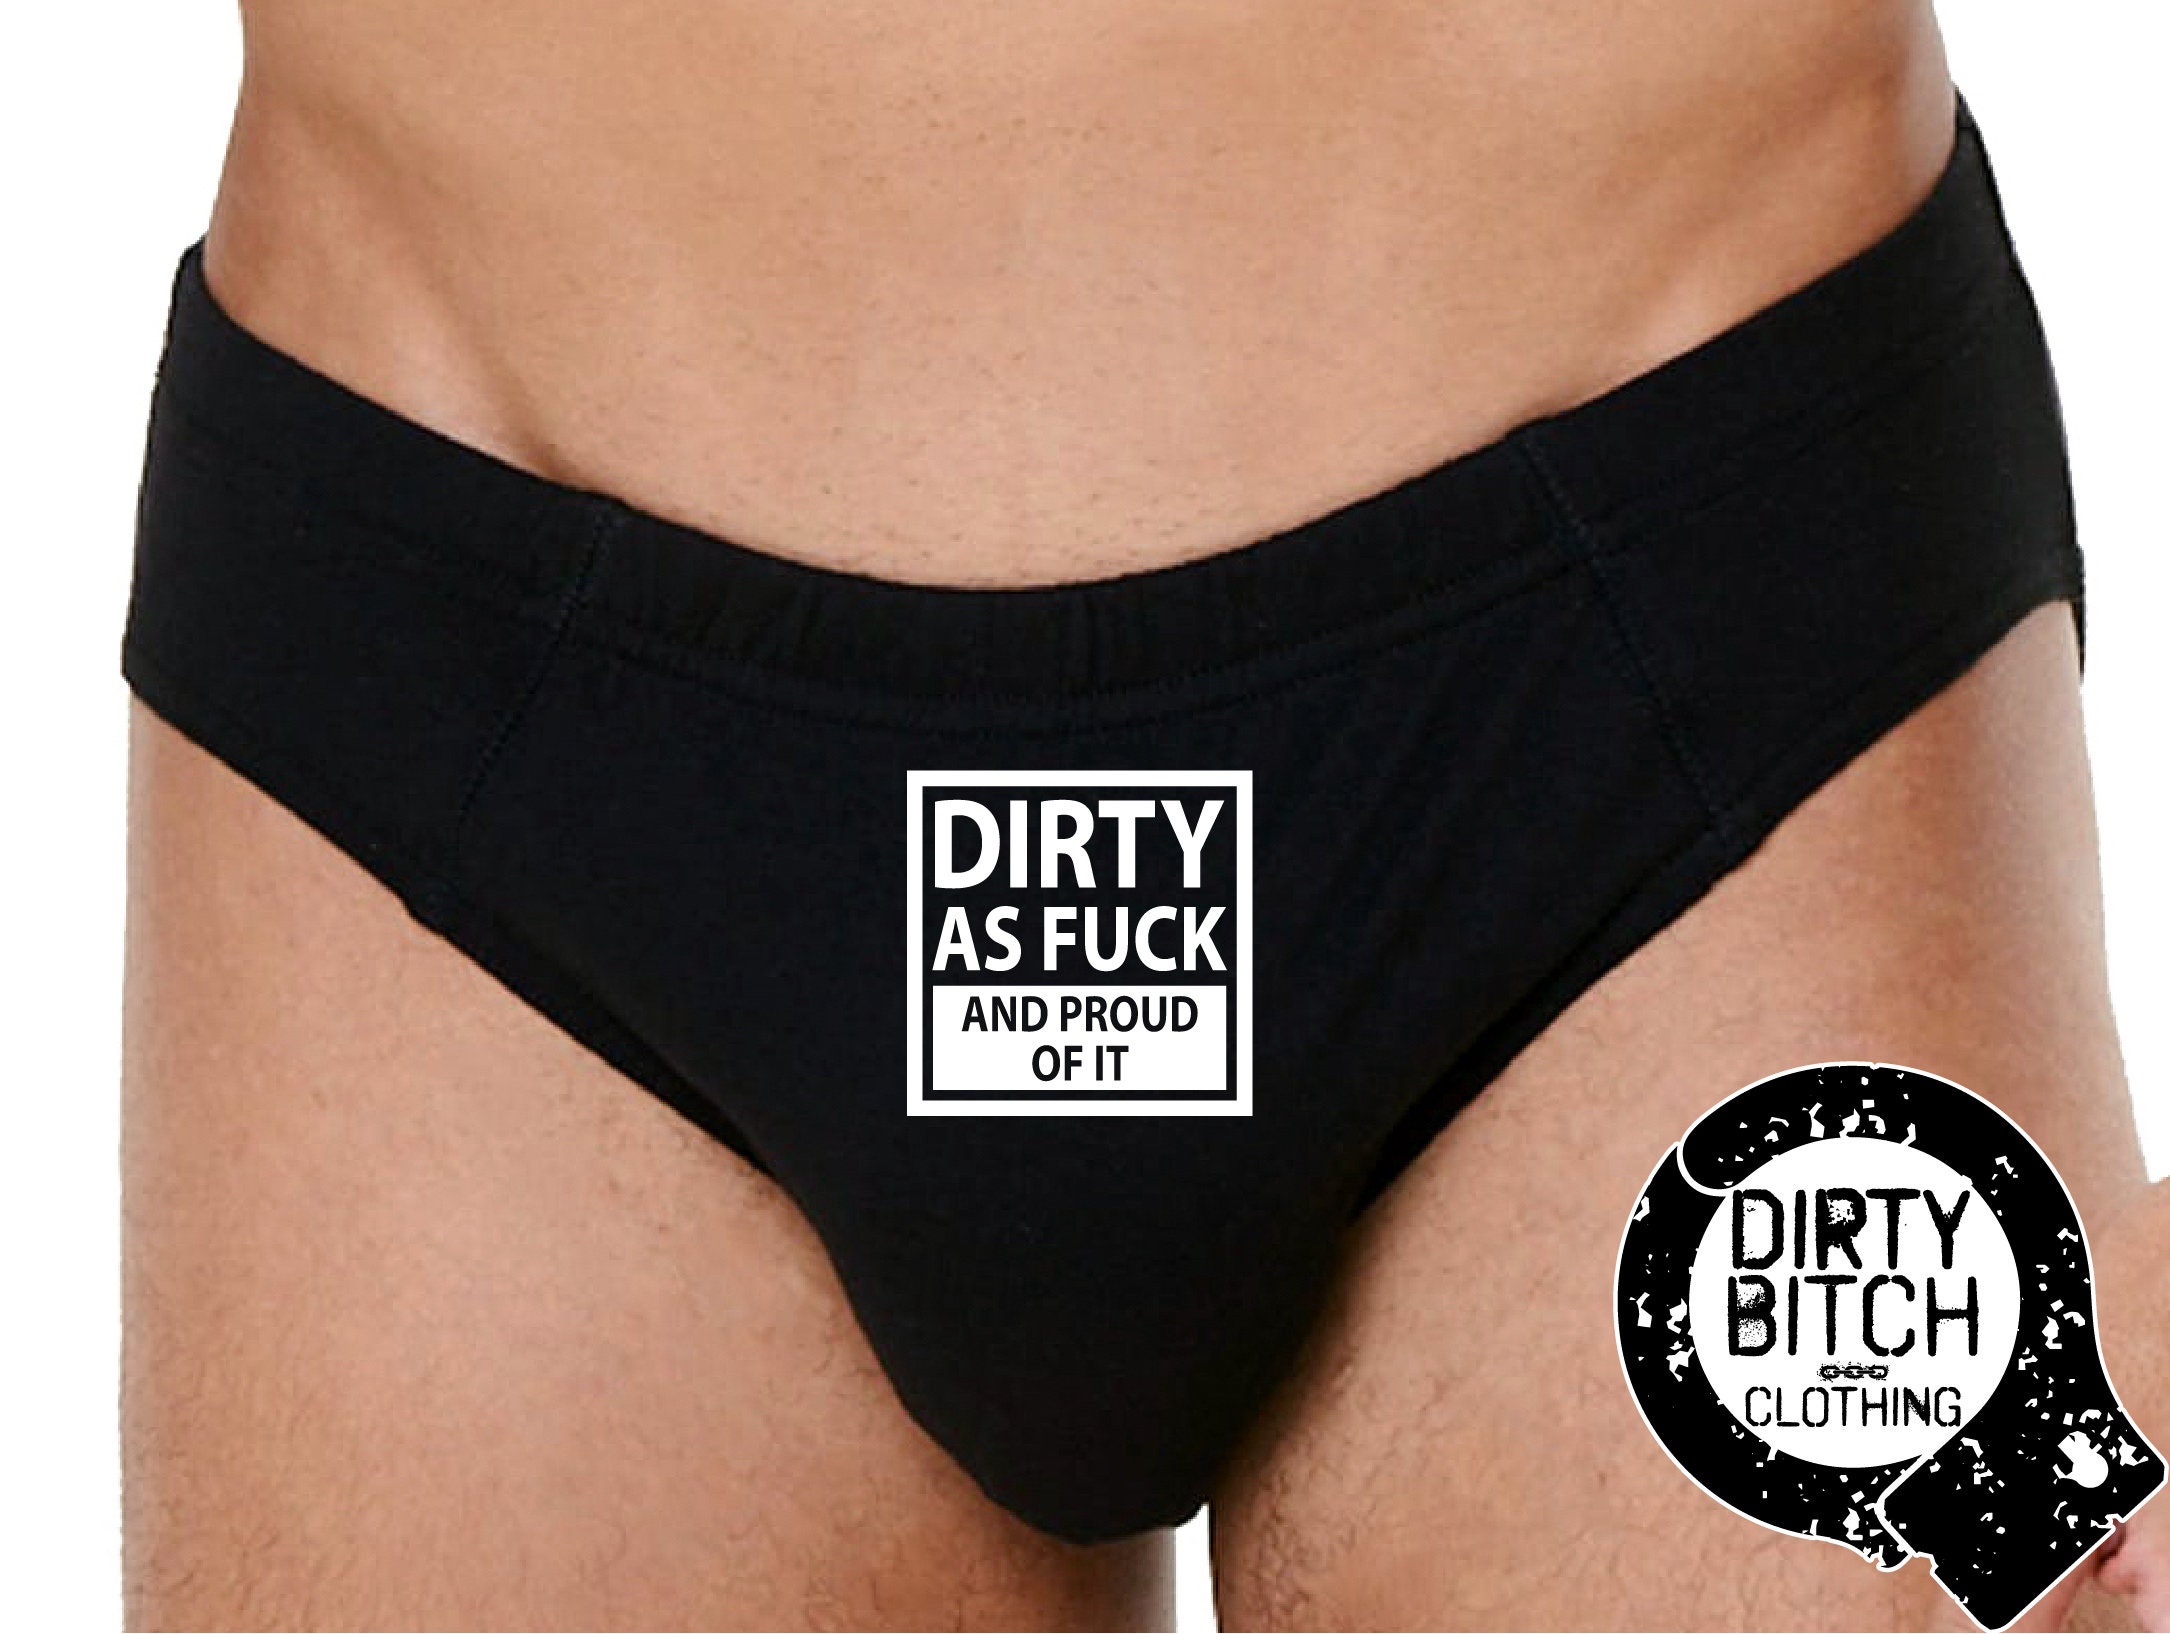 Dirty as Fuck and Proud of It Mens Underwear Adult Fetish